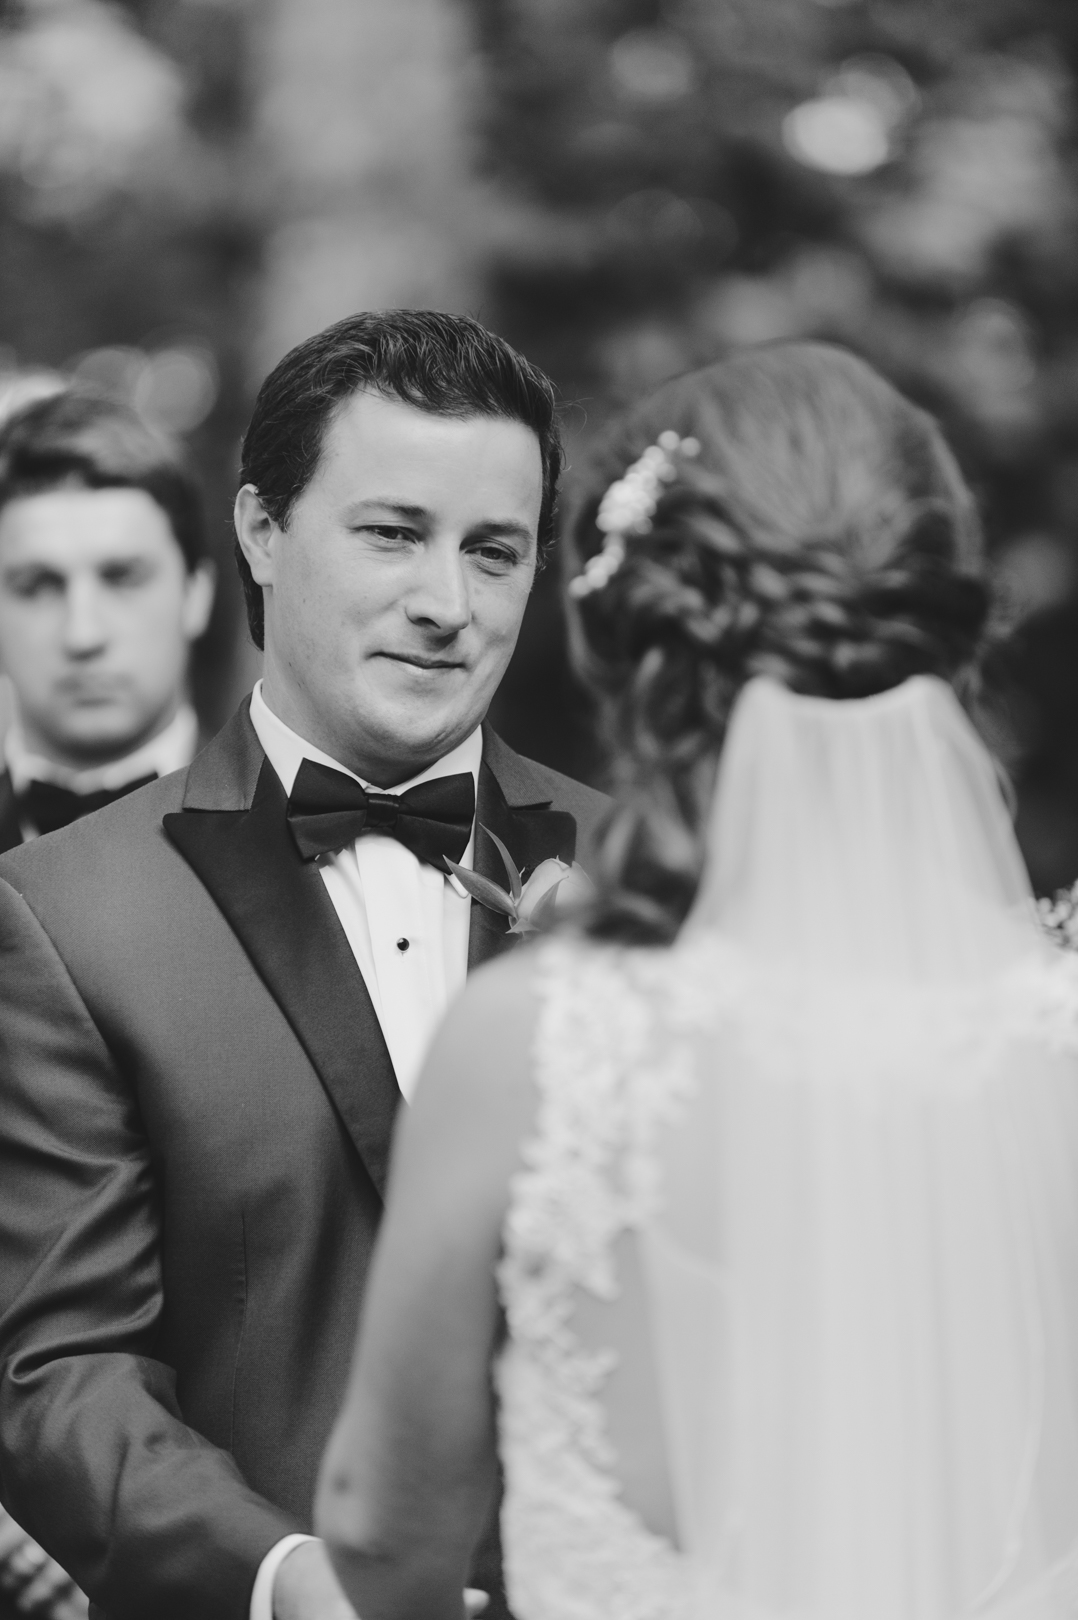 Groom smiling at his bride during the ceremony